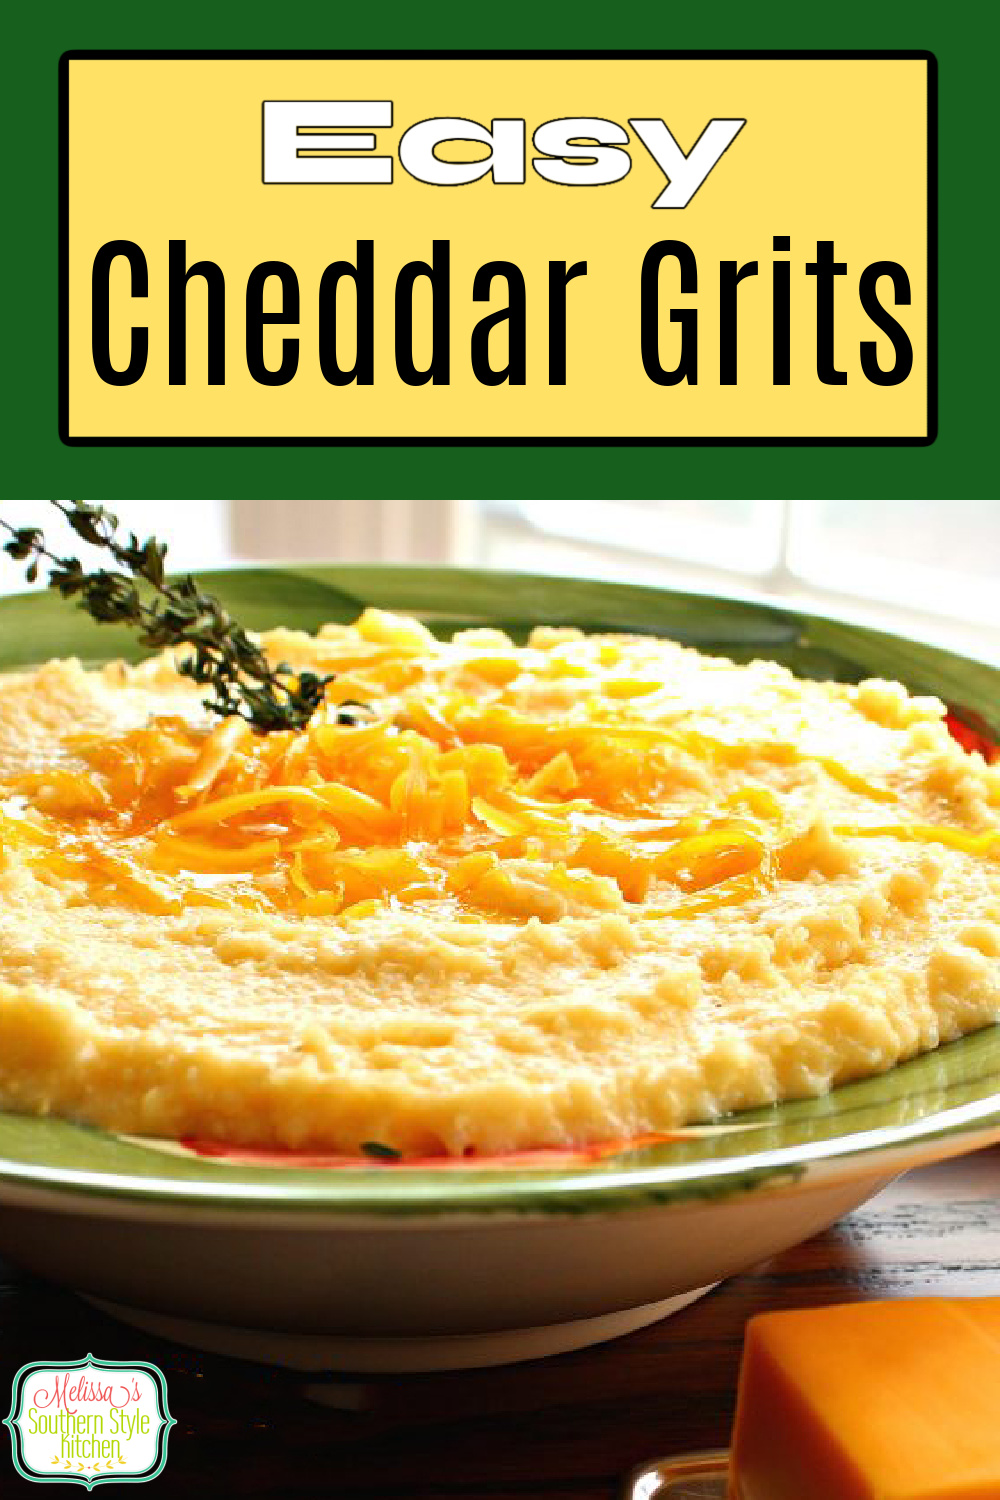 These easy Cheesy Cheddar Grits can be served at any meal as a side dish, topped with shrimp for an entree or bacon and eggs for breakfast #cheesegrits #cheddargrits #easygrits #gritsrecipes #southerngrits #southernrecipes #cheddar #breakfast #shrimpandgrits via @melissasssk